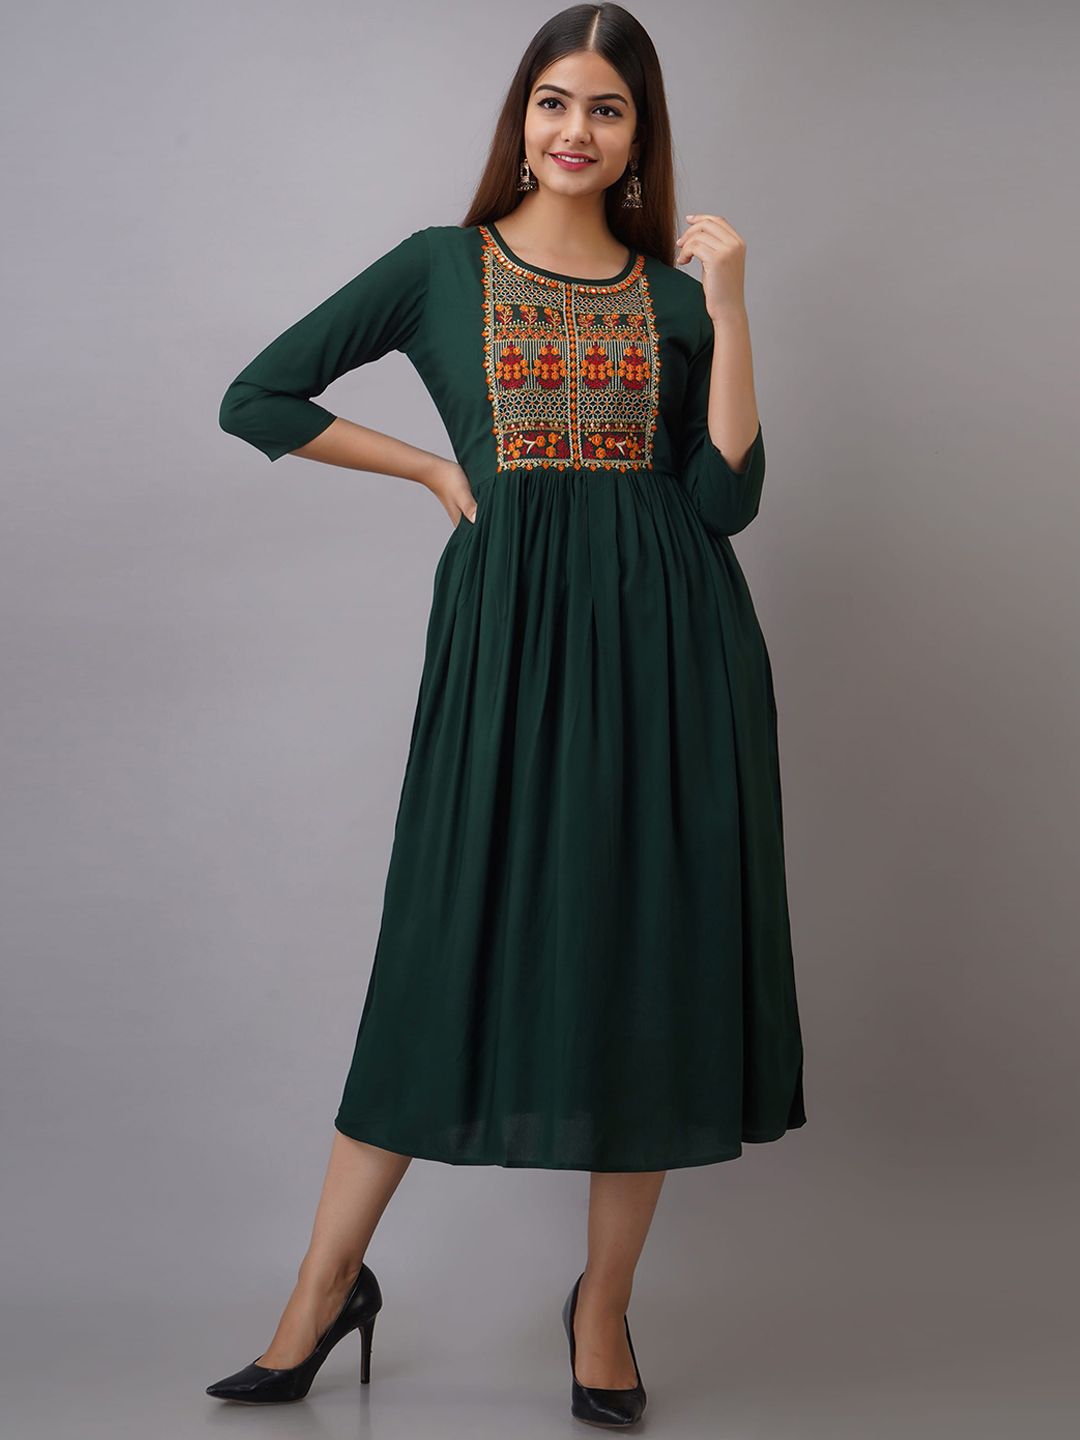 Women Touch Green Embroidered Midi Dress Price in India